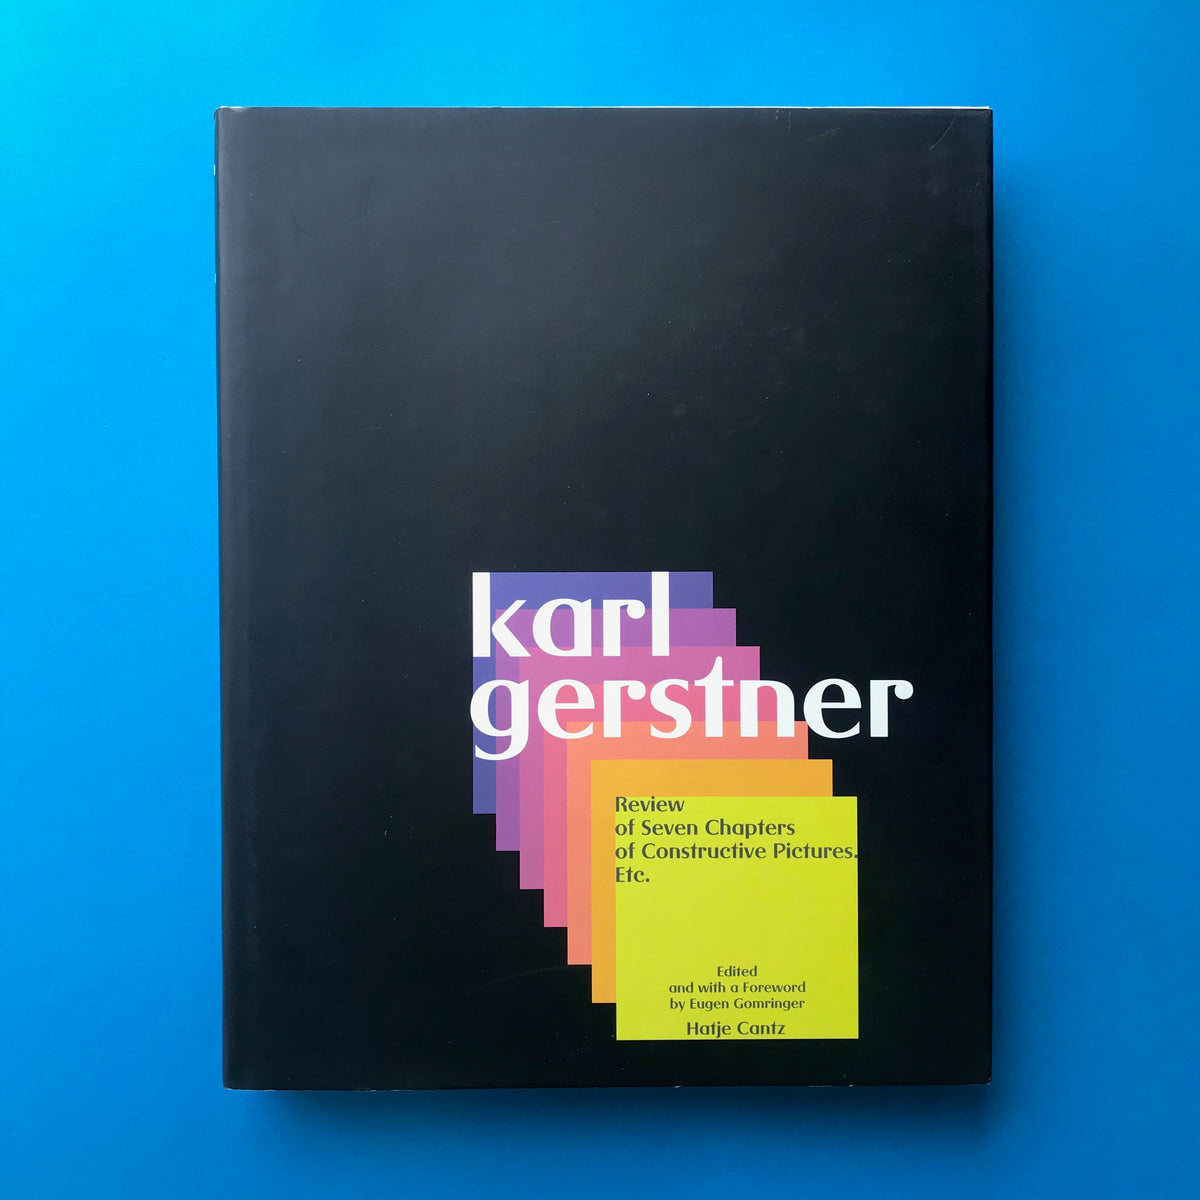 Karl Gerstner, Review of Seven Chapters of Constructive Pictures 